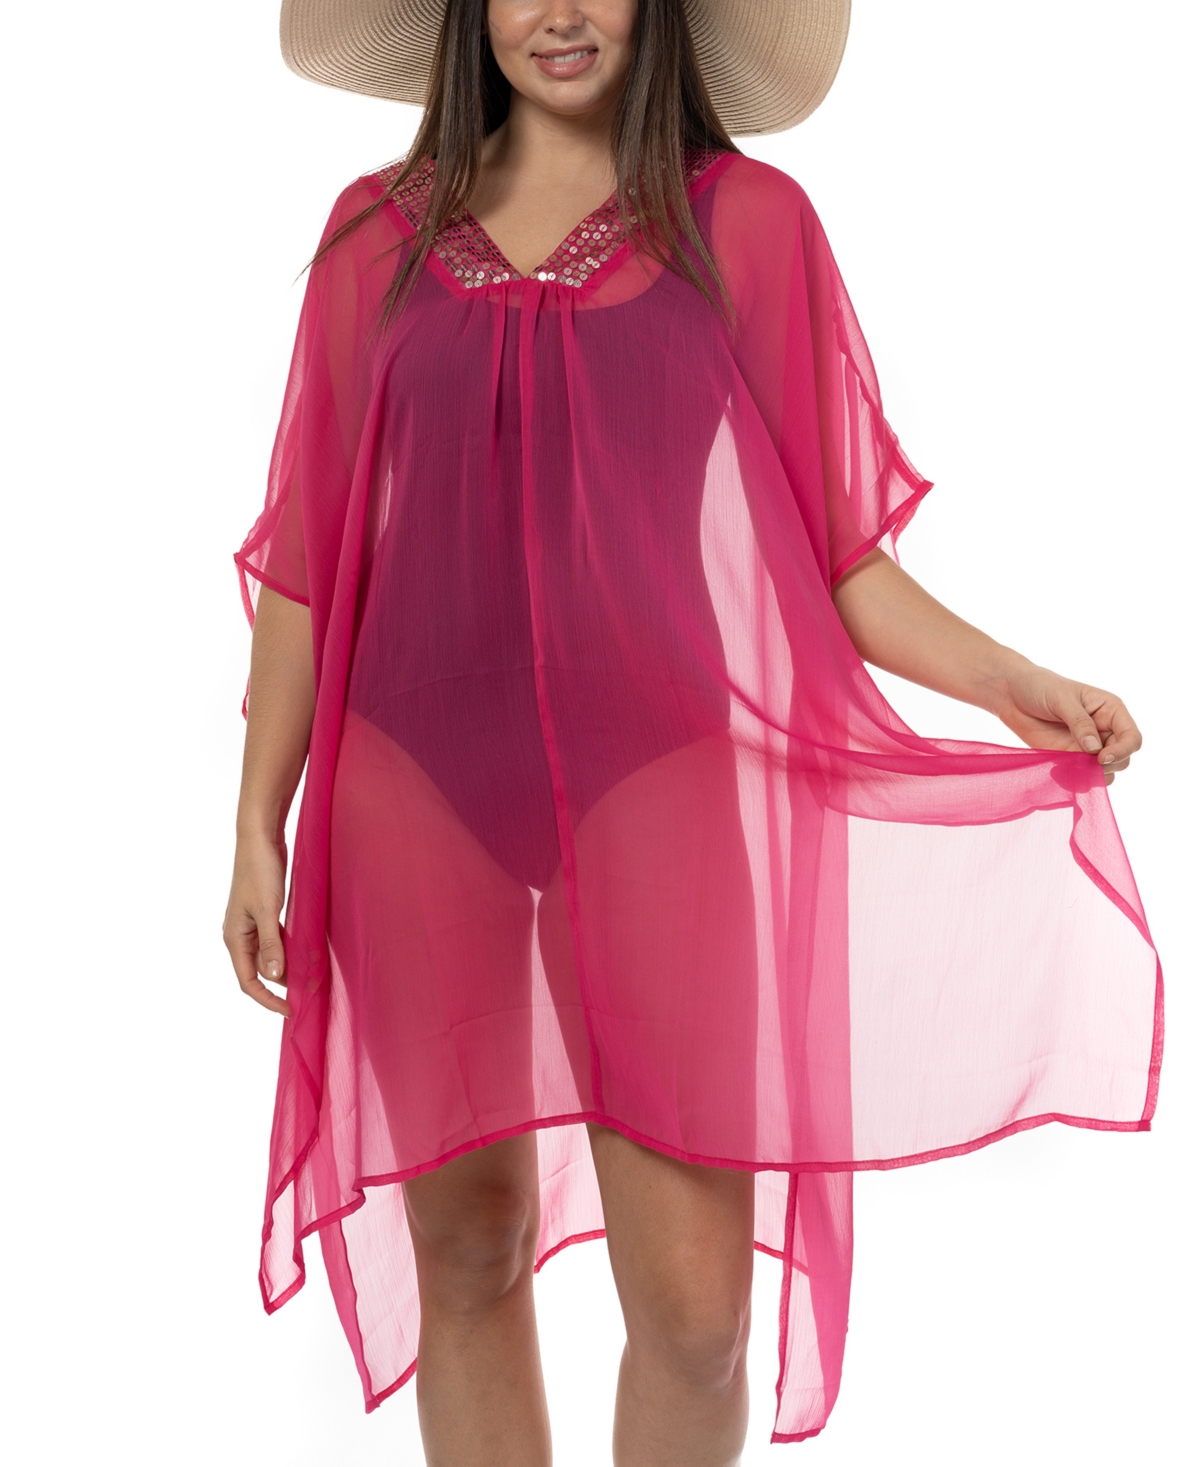 Women's Embellished Caftan Cover-Up, Created for Macy's - Fuchsia